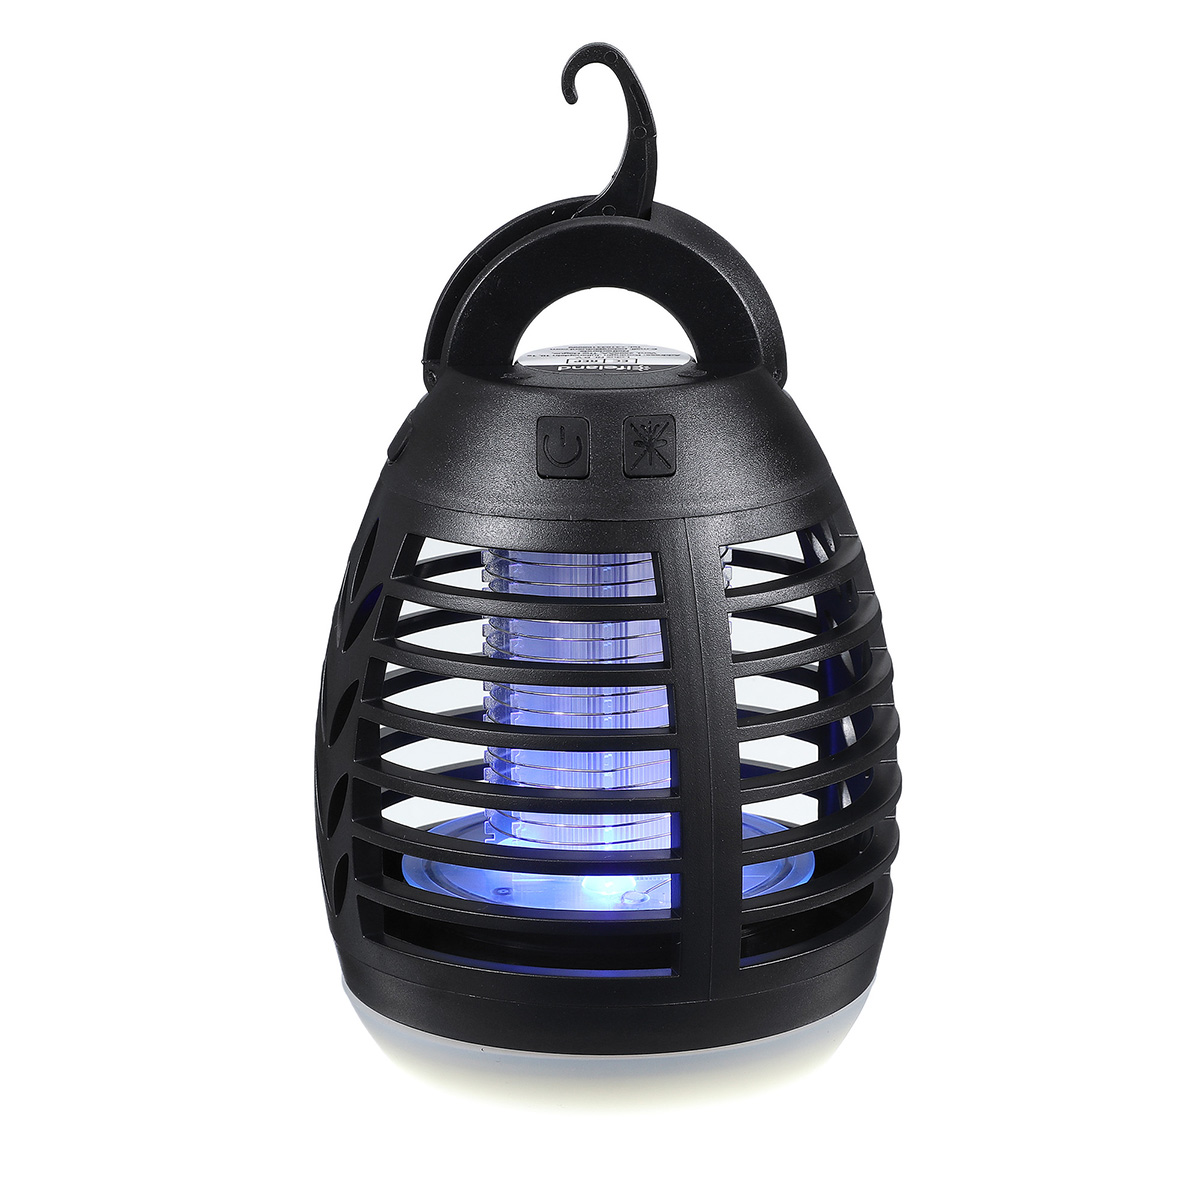 Elfeland-5W-Electric-Mosquito-Killer-Lamp-USB-Powered-Trap-Gnat-with-Hanger-for-Indoor-Outdoor-1710190-7